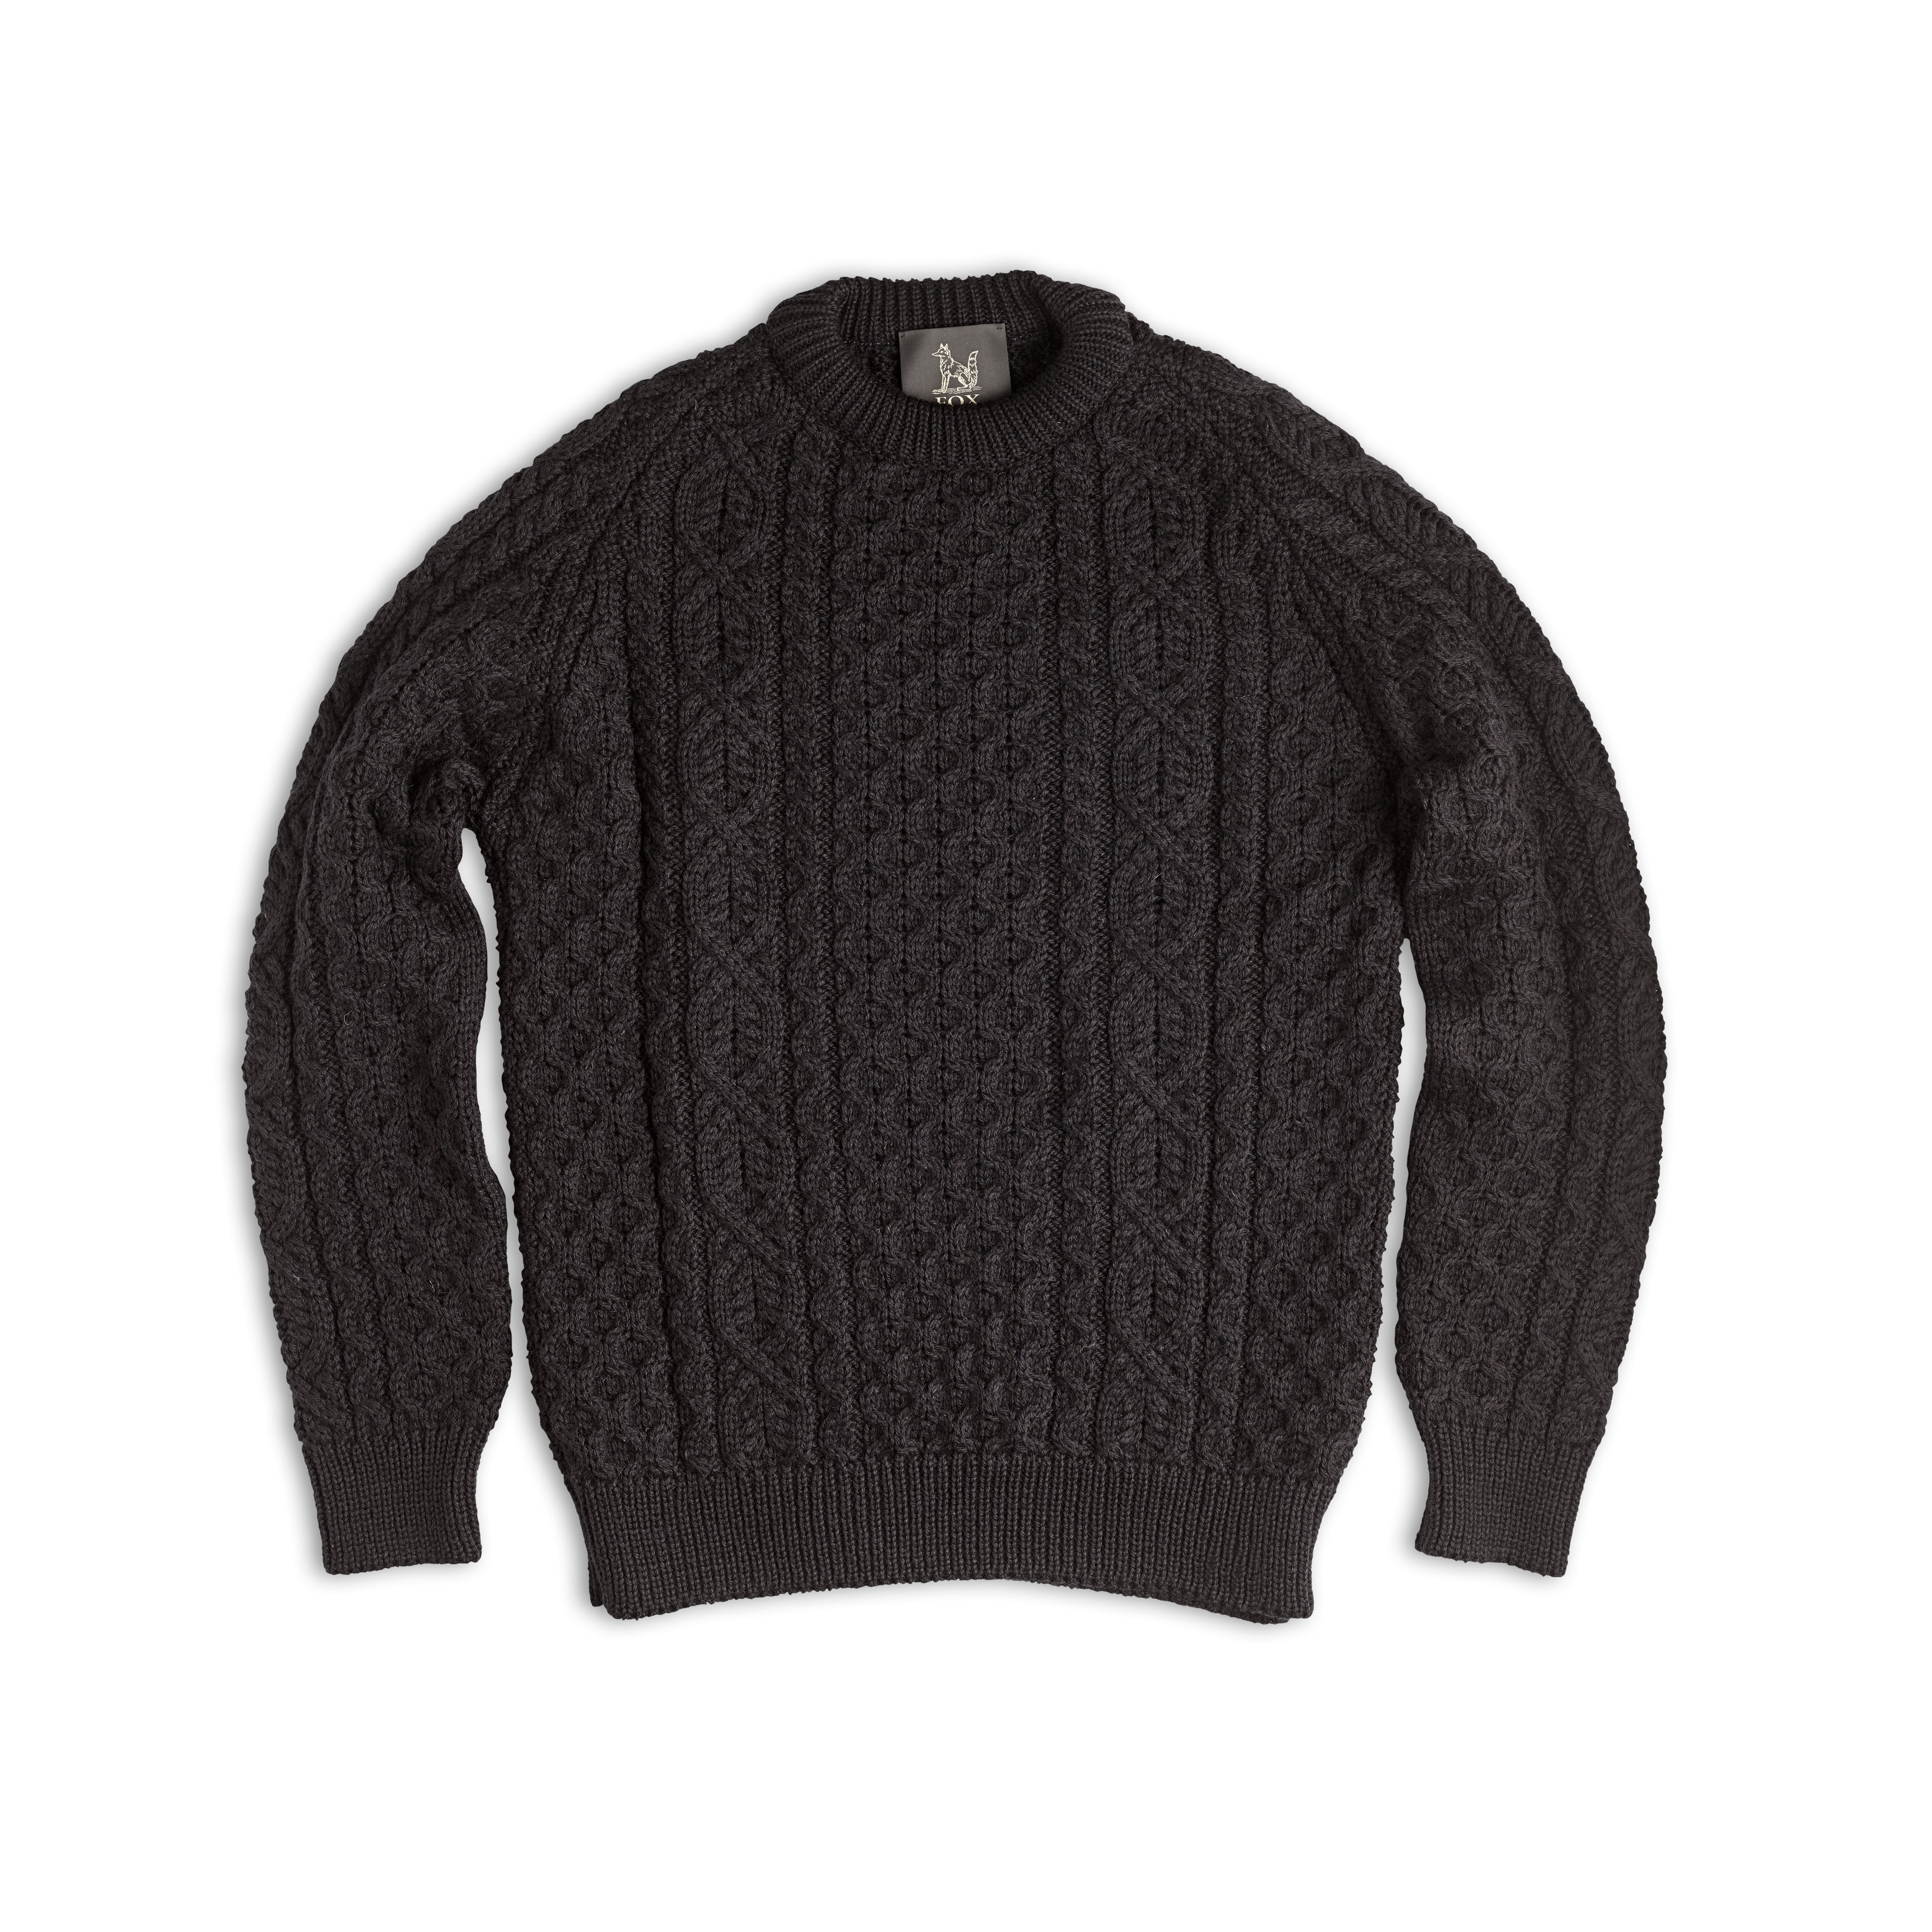 Navy Wool Cable Knit Jumper